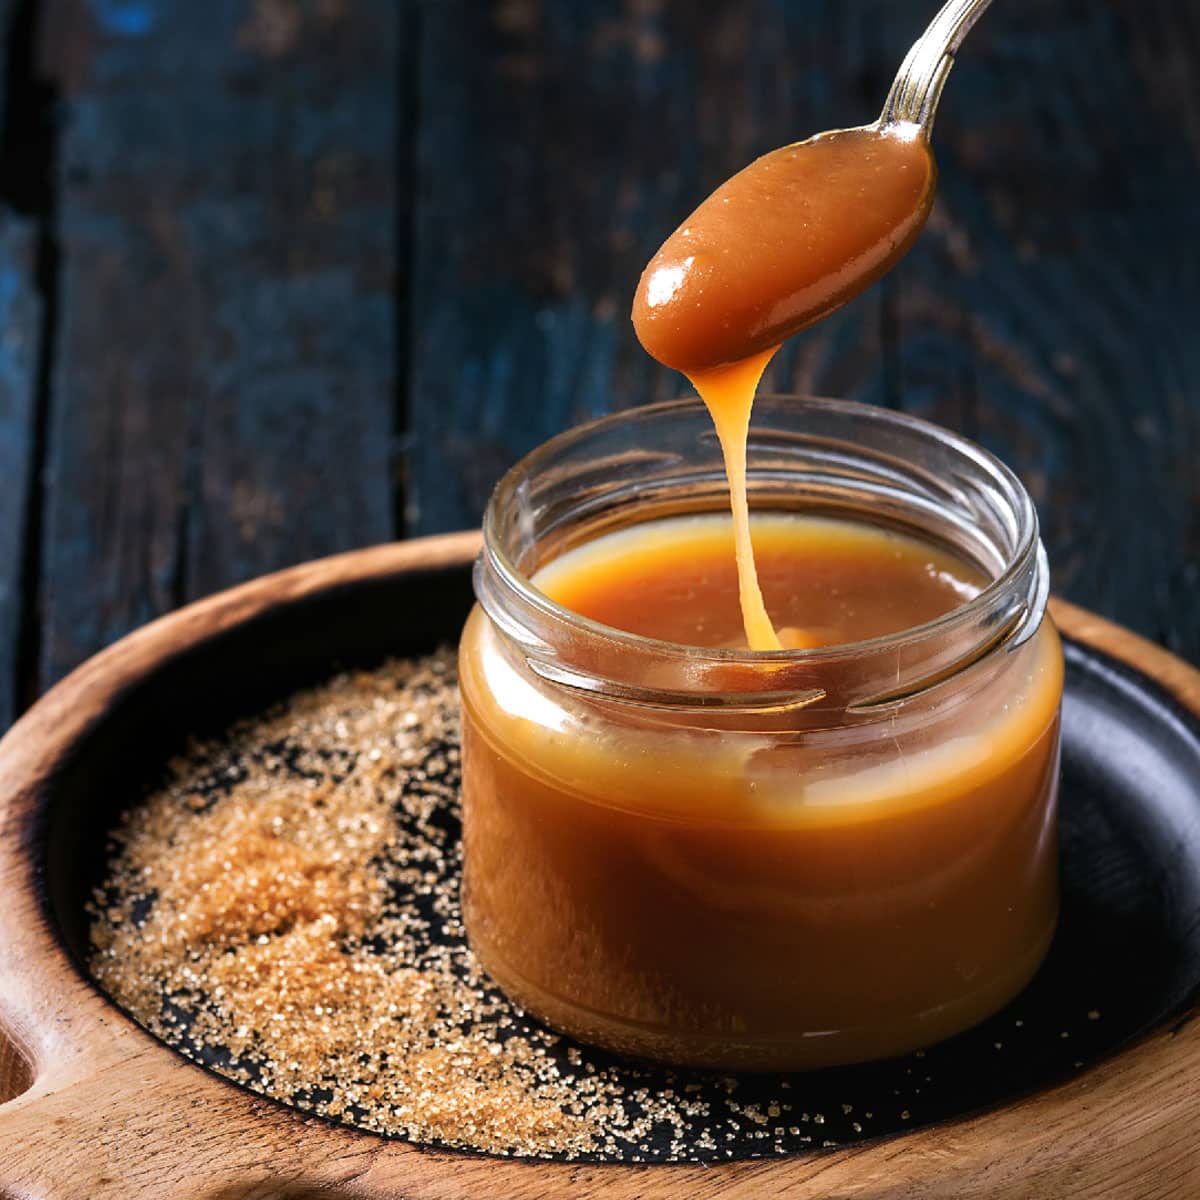 If you're a salted caramel devotee, you'll be blown away by this miso caramel recipe. Adding miso paste brings a unique umami flavor often referred to as the "fifth flavor," elevating the taste experience to a whole new level.